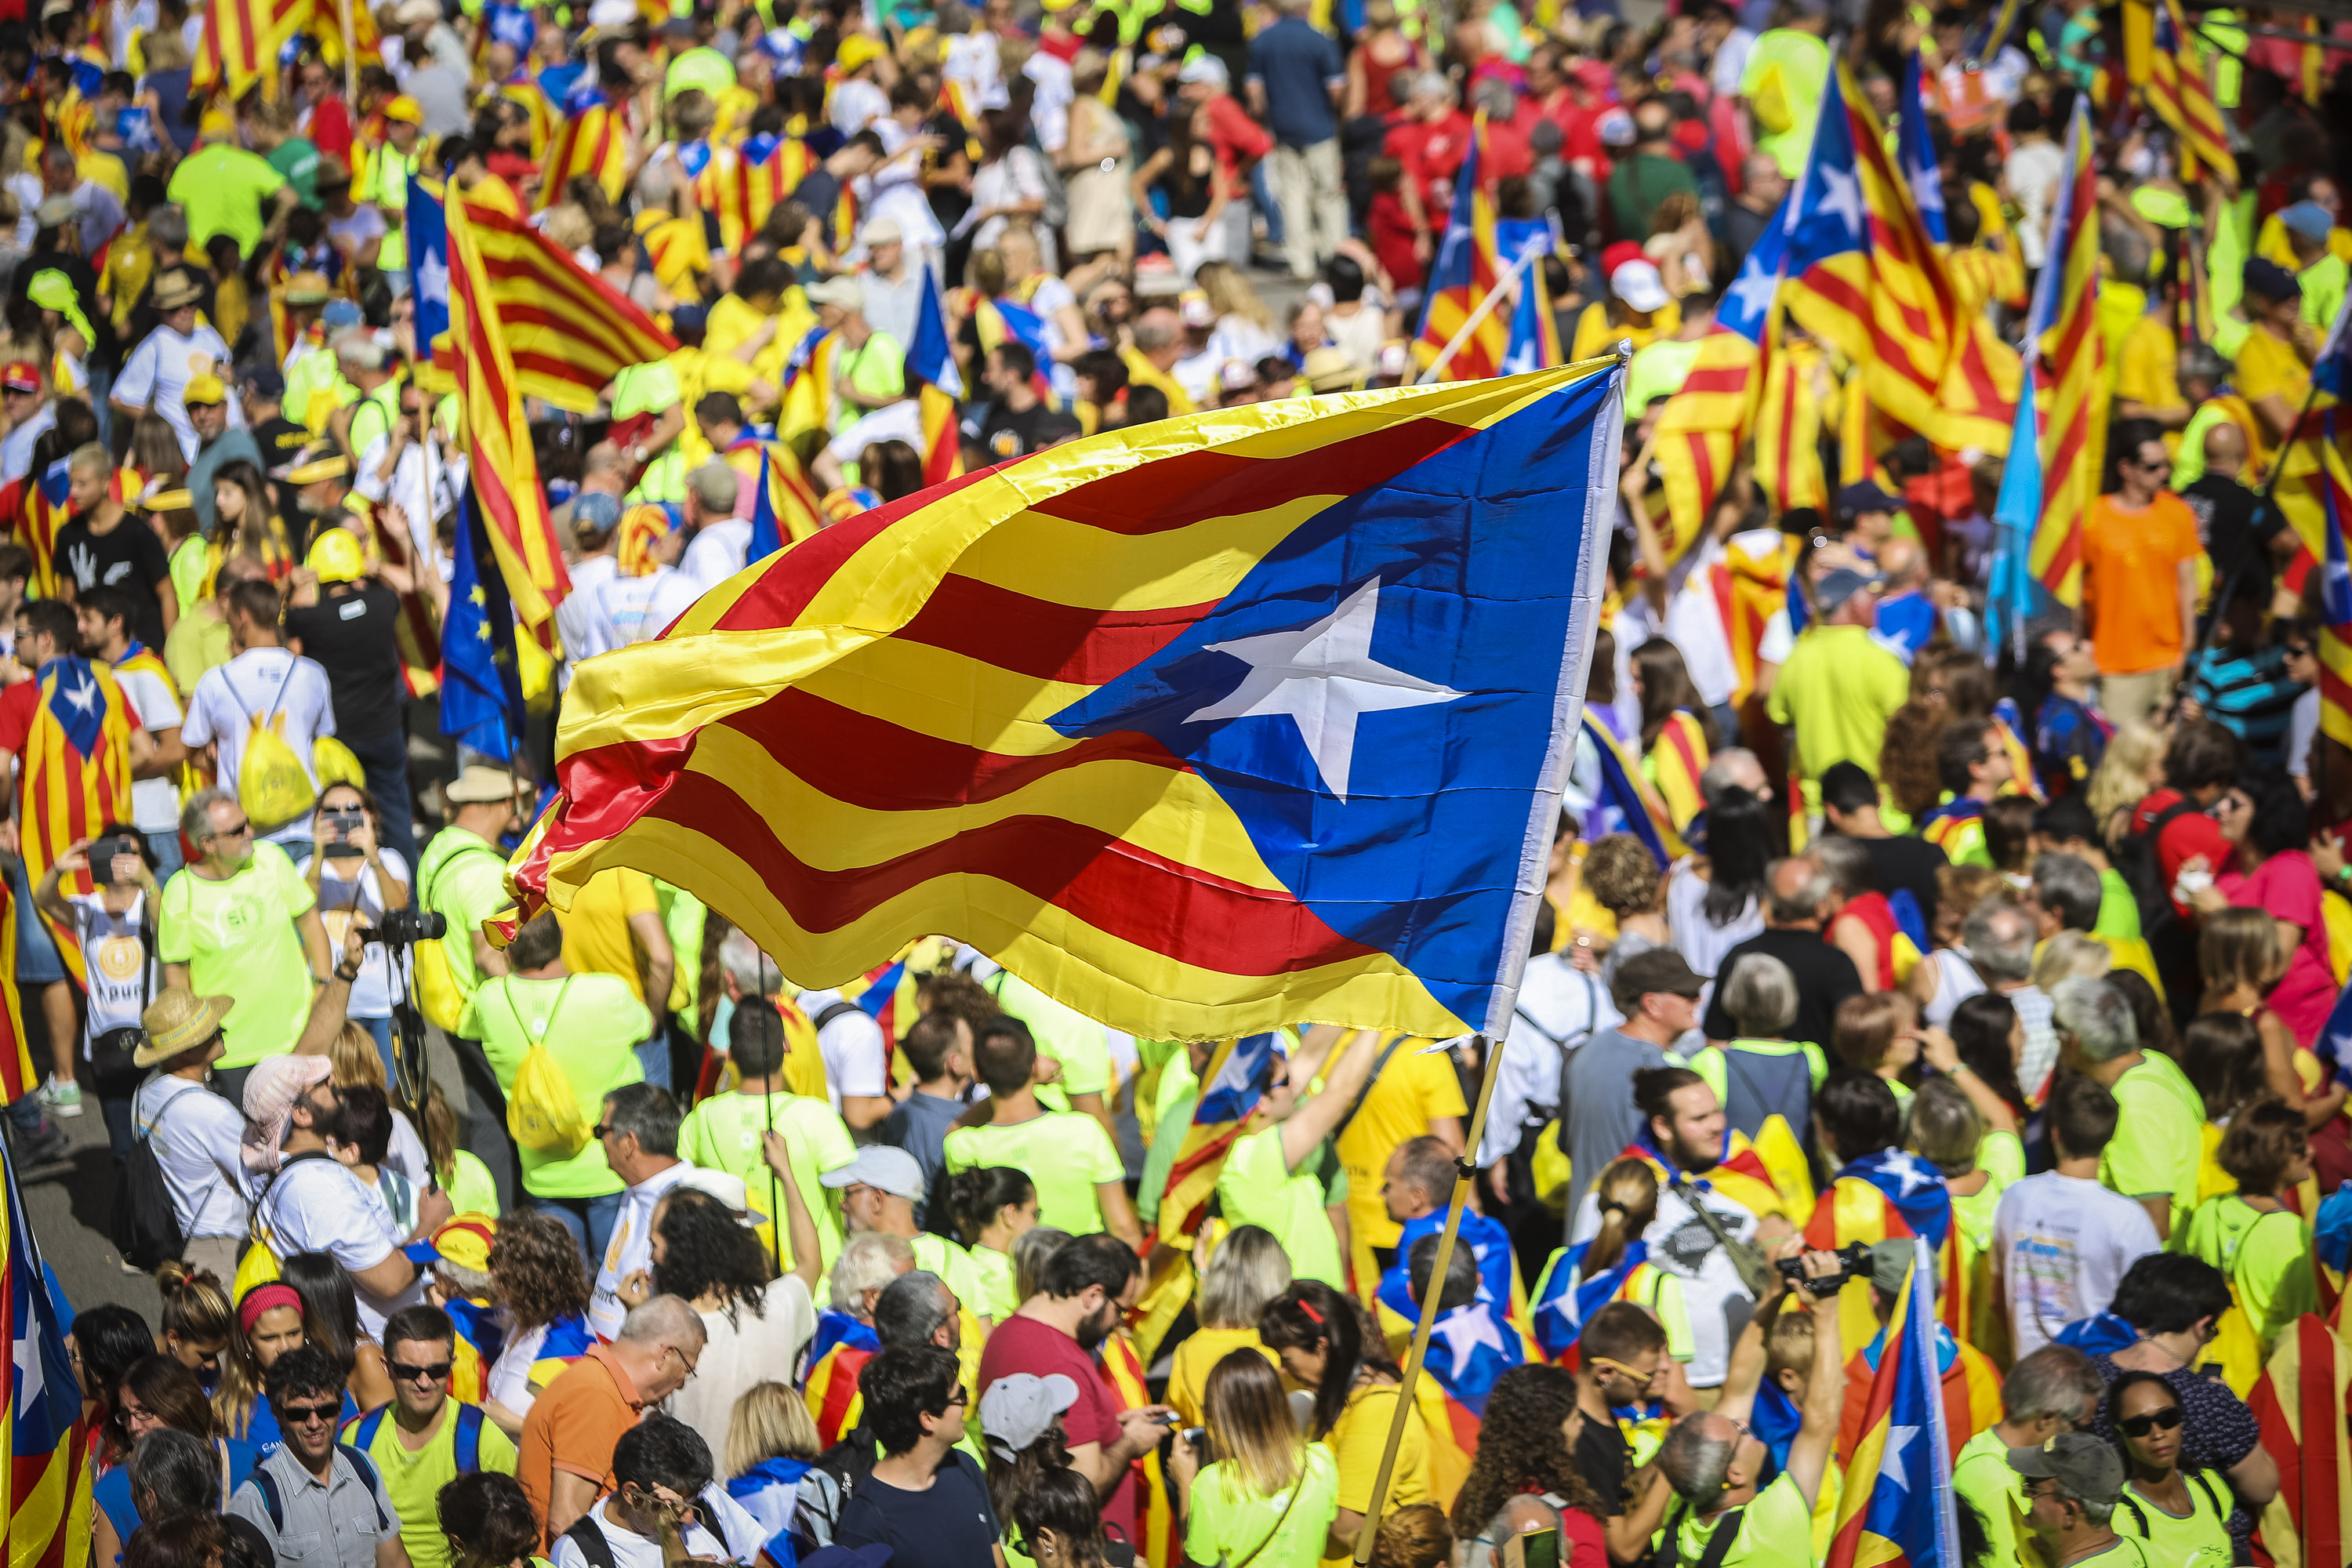 Catalan independence flag at the rally (by ACN)